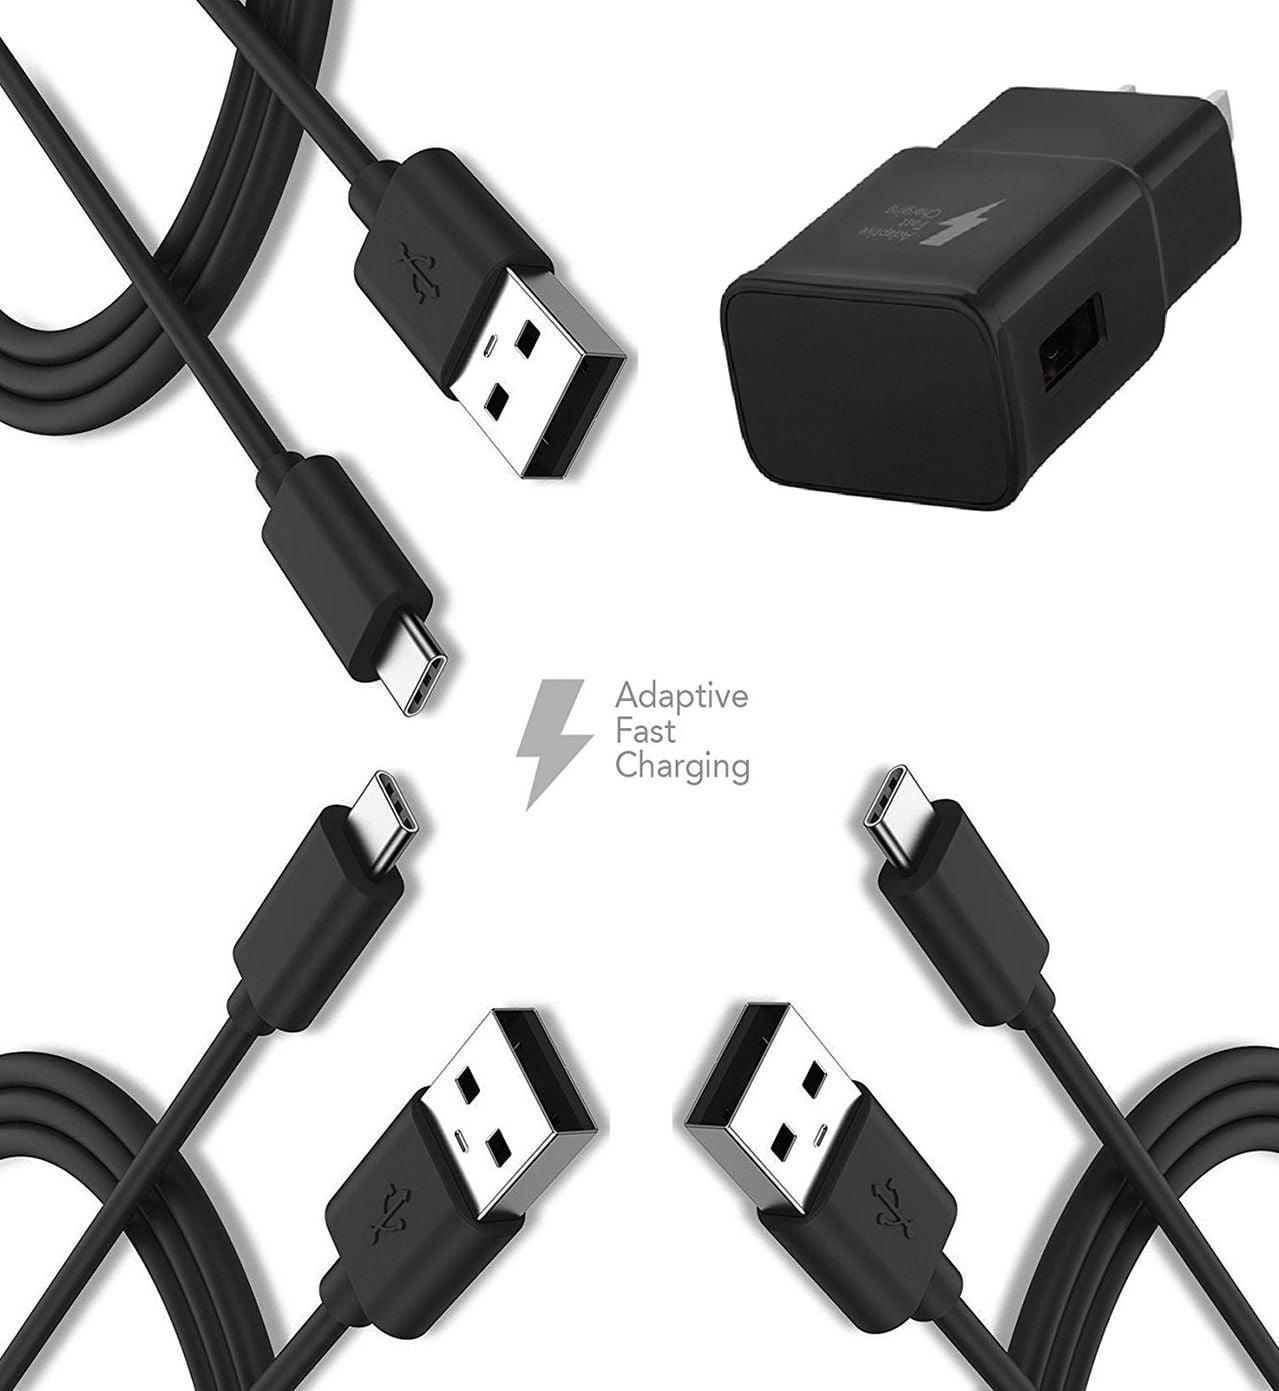 rol niezen audit Ixir Sony Xperia X Compact Charger Fast Type-C USB 2.0 Cable Kit by TruWire  - (1 Wall Charger + 3 Type-C Cable) True Digital Adaptive Fast Charging  uses dual voltages for up